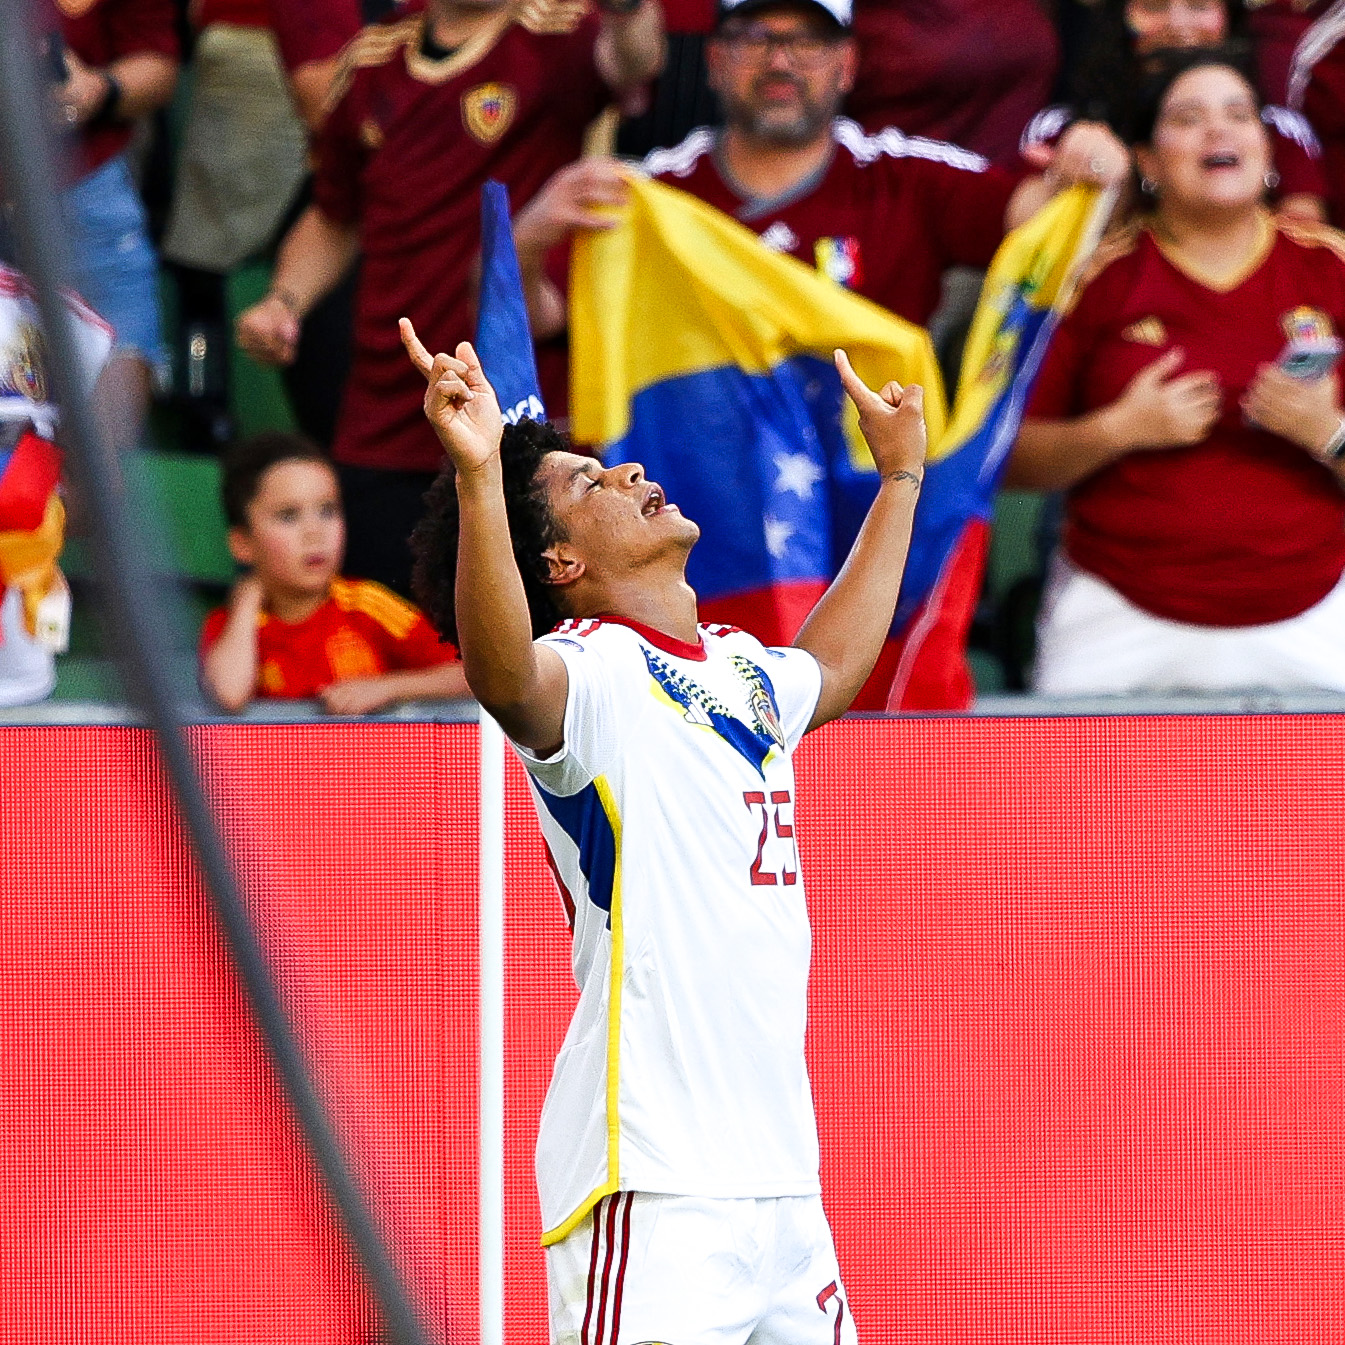 Venezuela Secures Top Spot in Group B with 3-0 Victory Over Jamaica